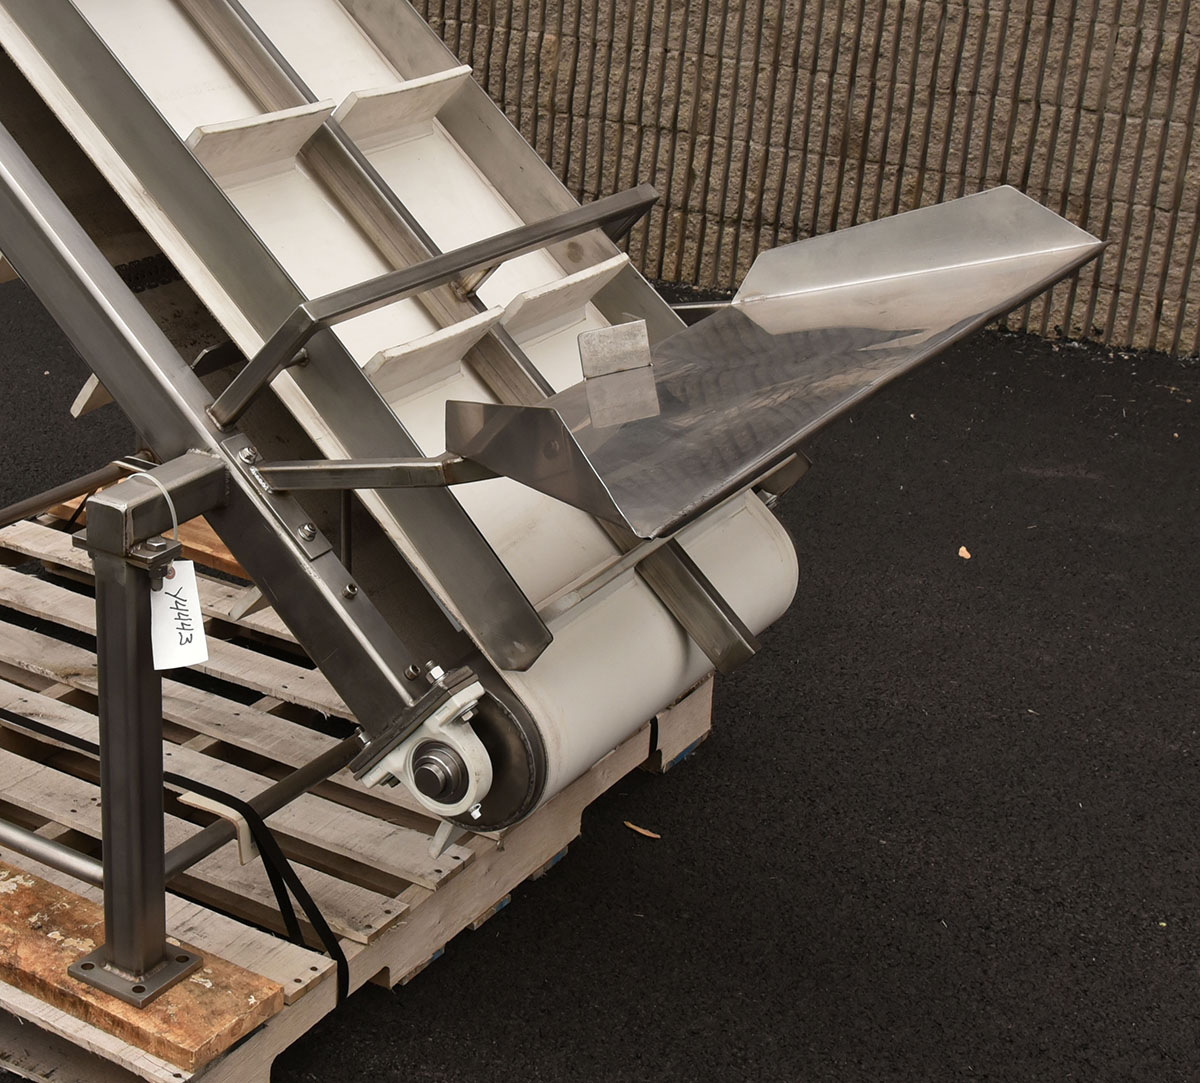 Used INCLINED FEED CONVEYOR,  22 inch wide cleated belt,  food grade, stainless steel, in stock, Alard item Y4443